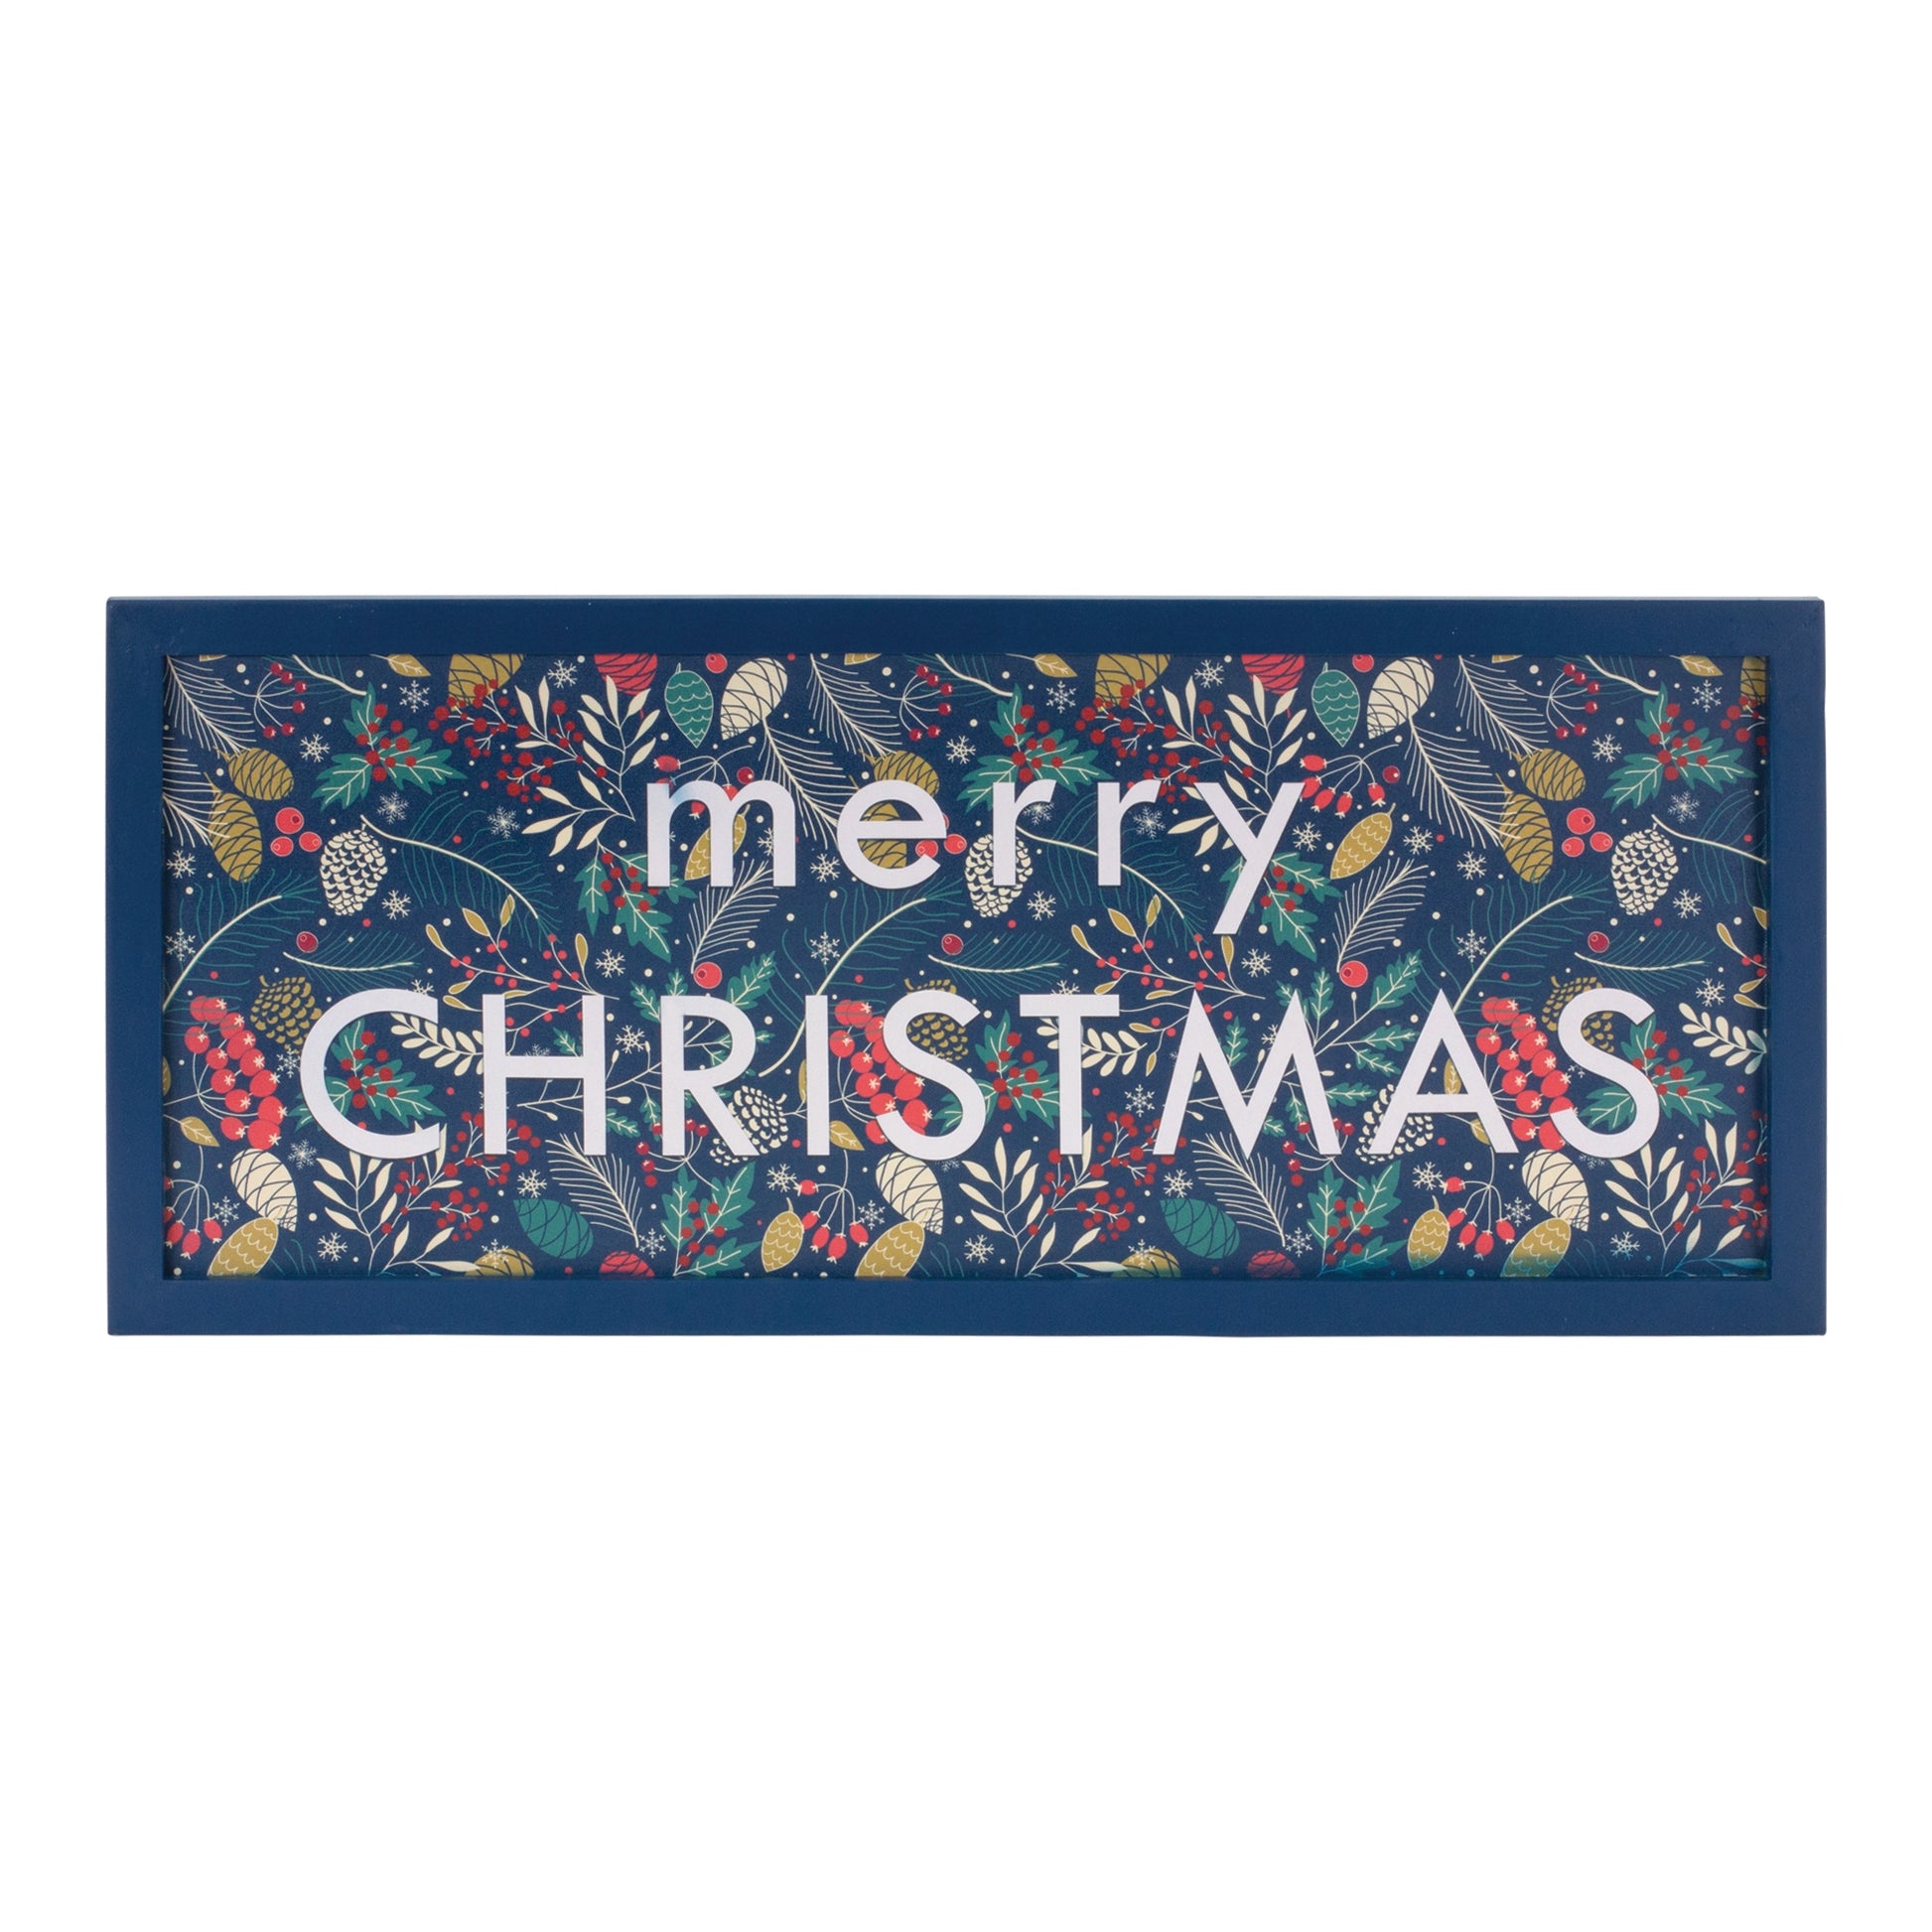 merry christmas sign is blue with white text and colorful pinecones displayed against a white background